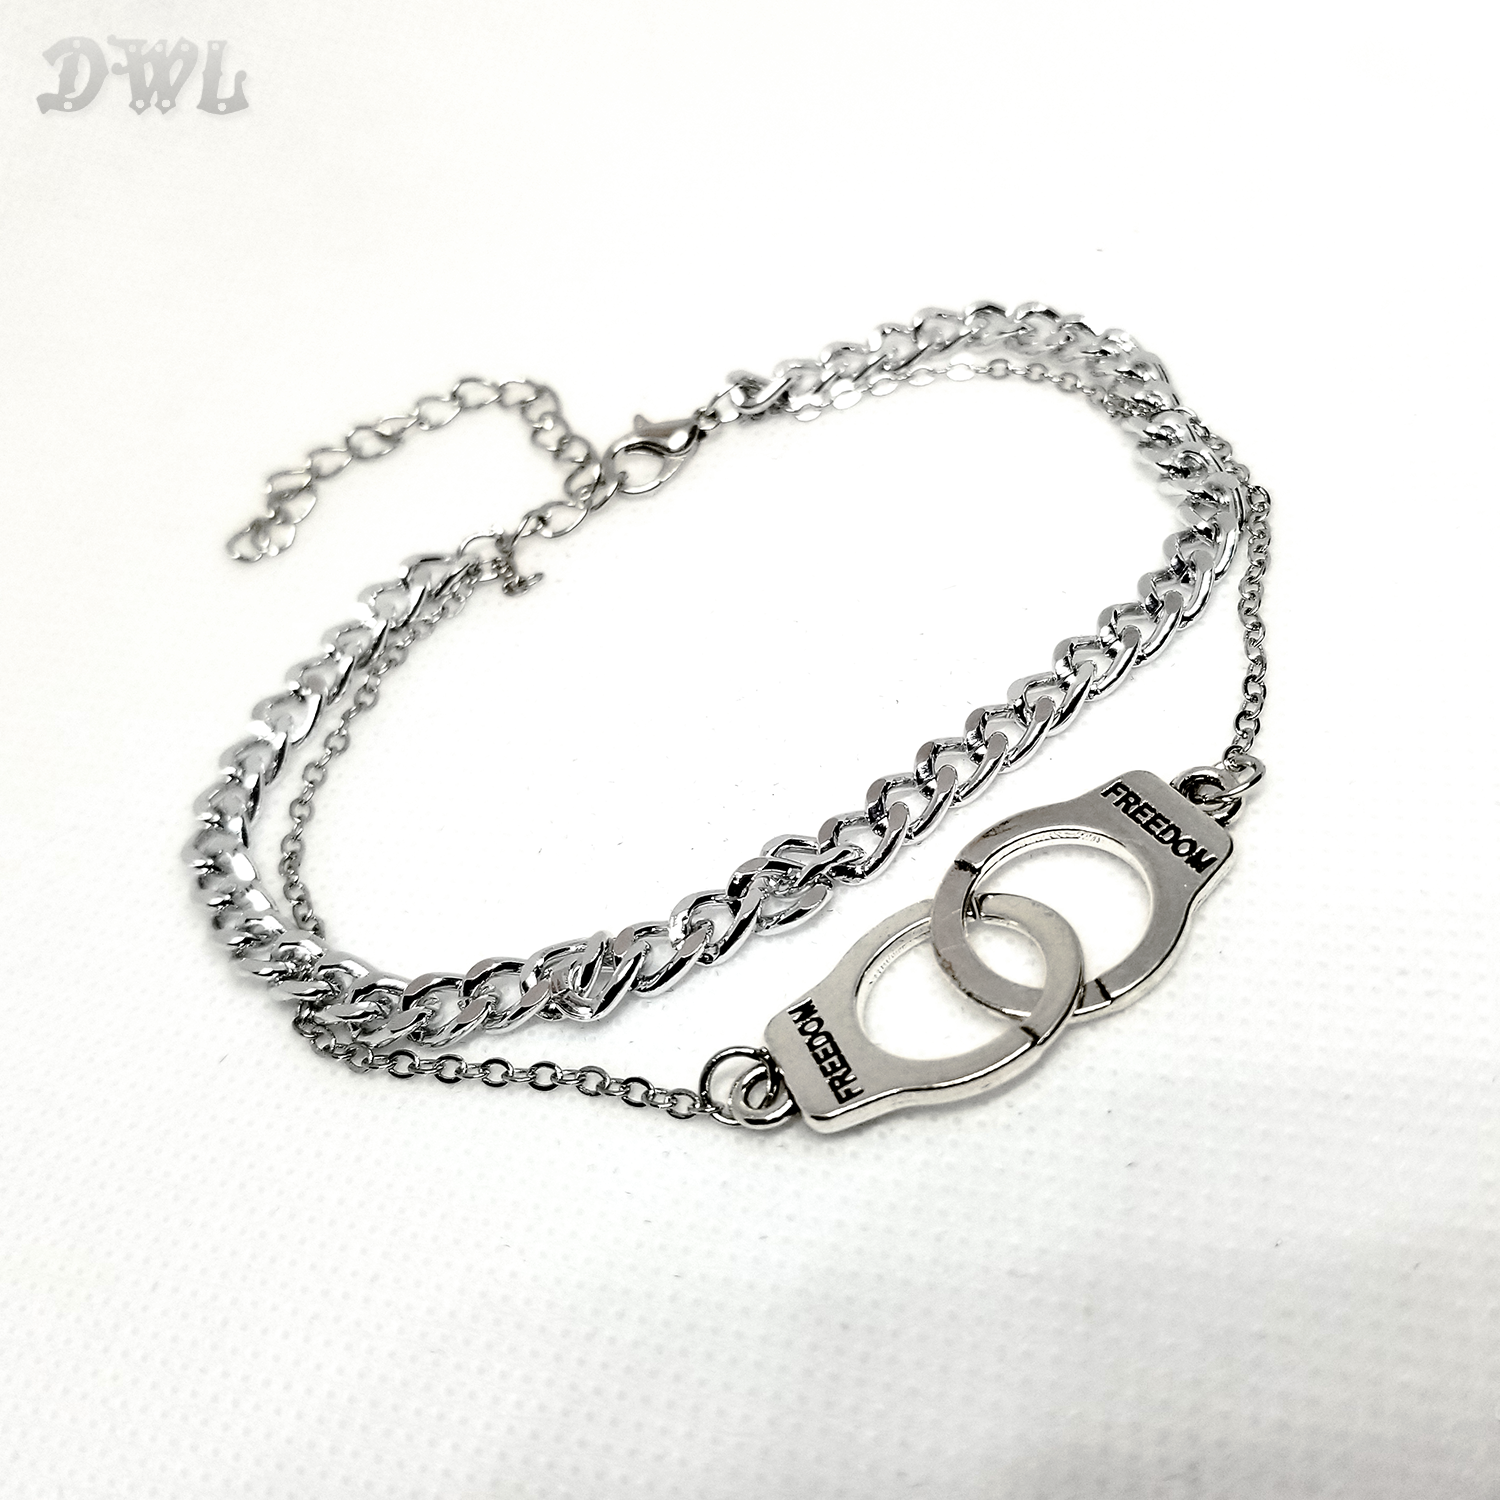 Tibetan Silver Freedom Handcuffs /& Key Silver Plated Chain Anklet 9.5/" BDSM